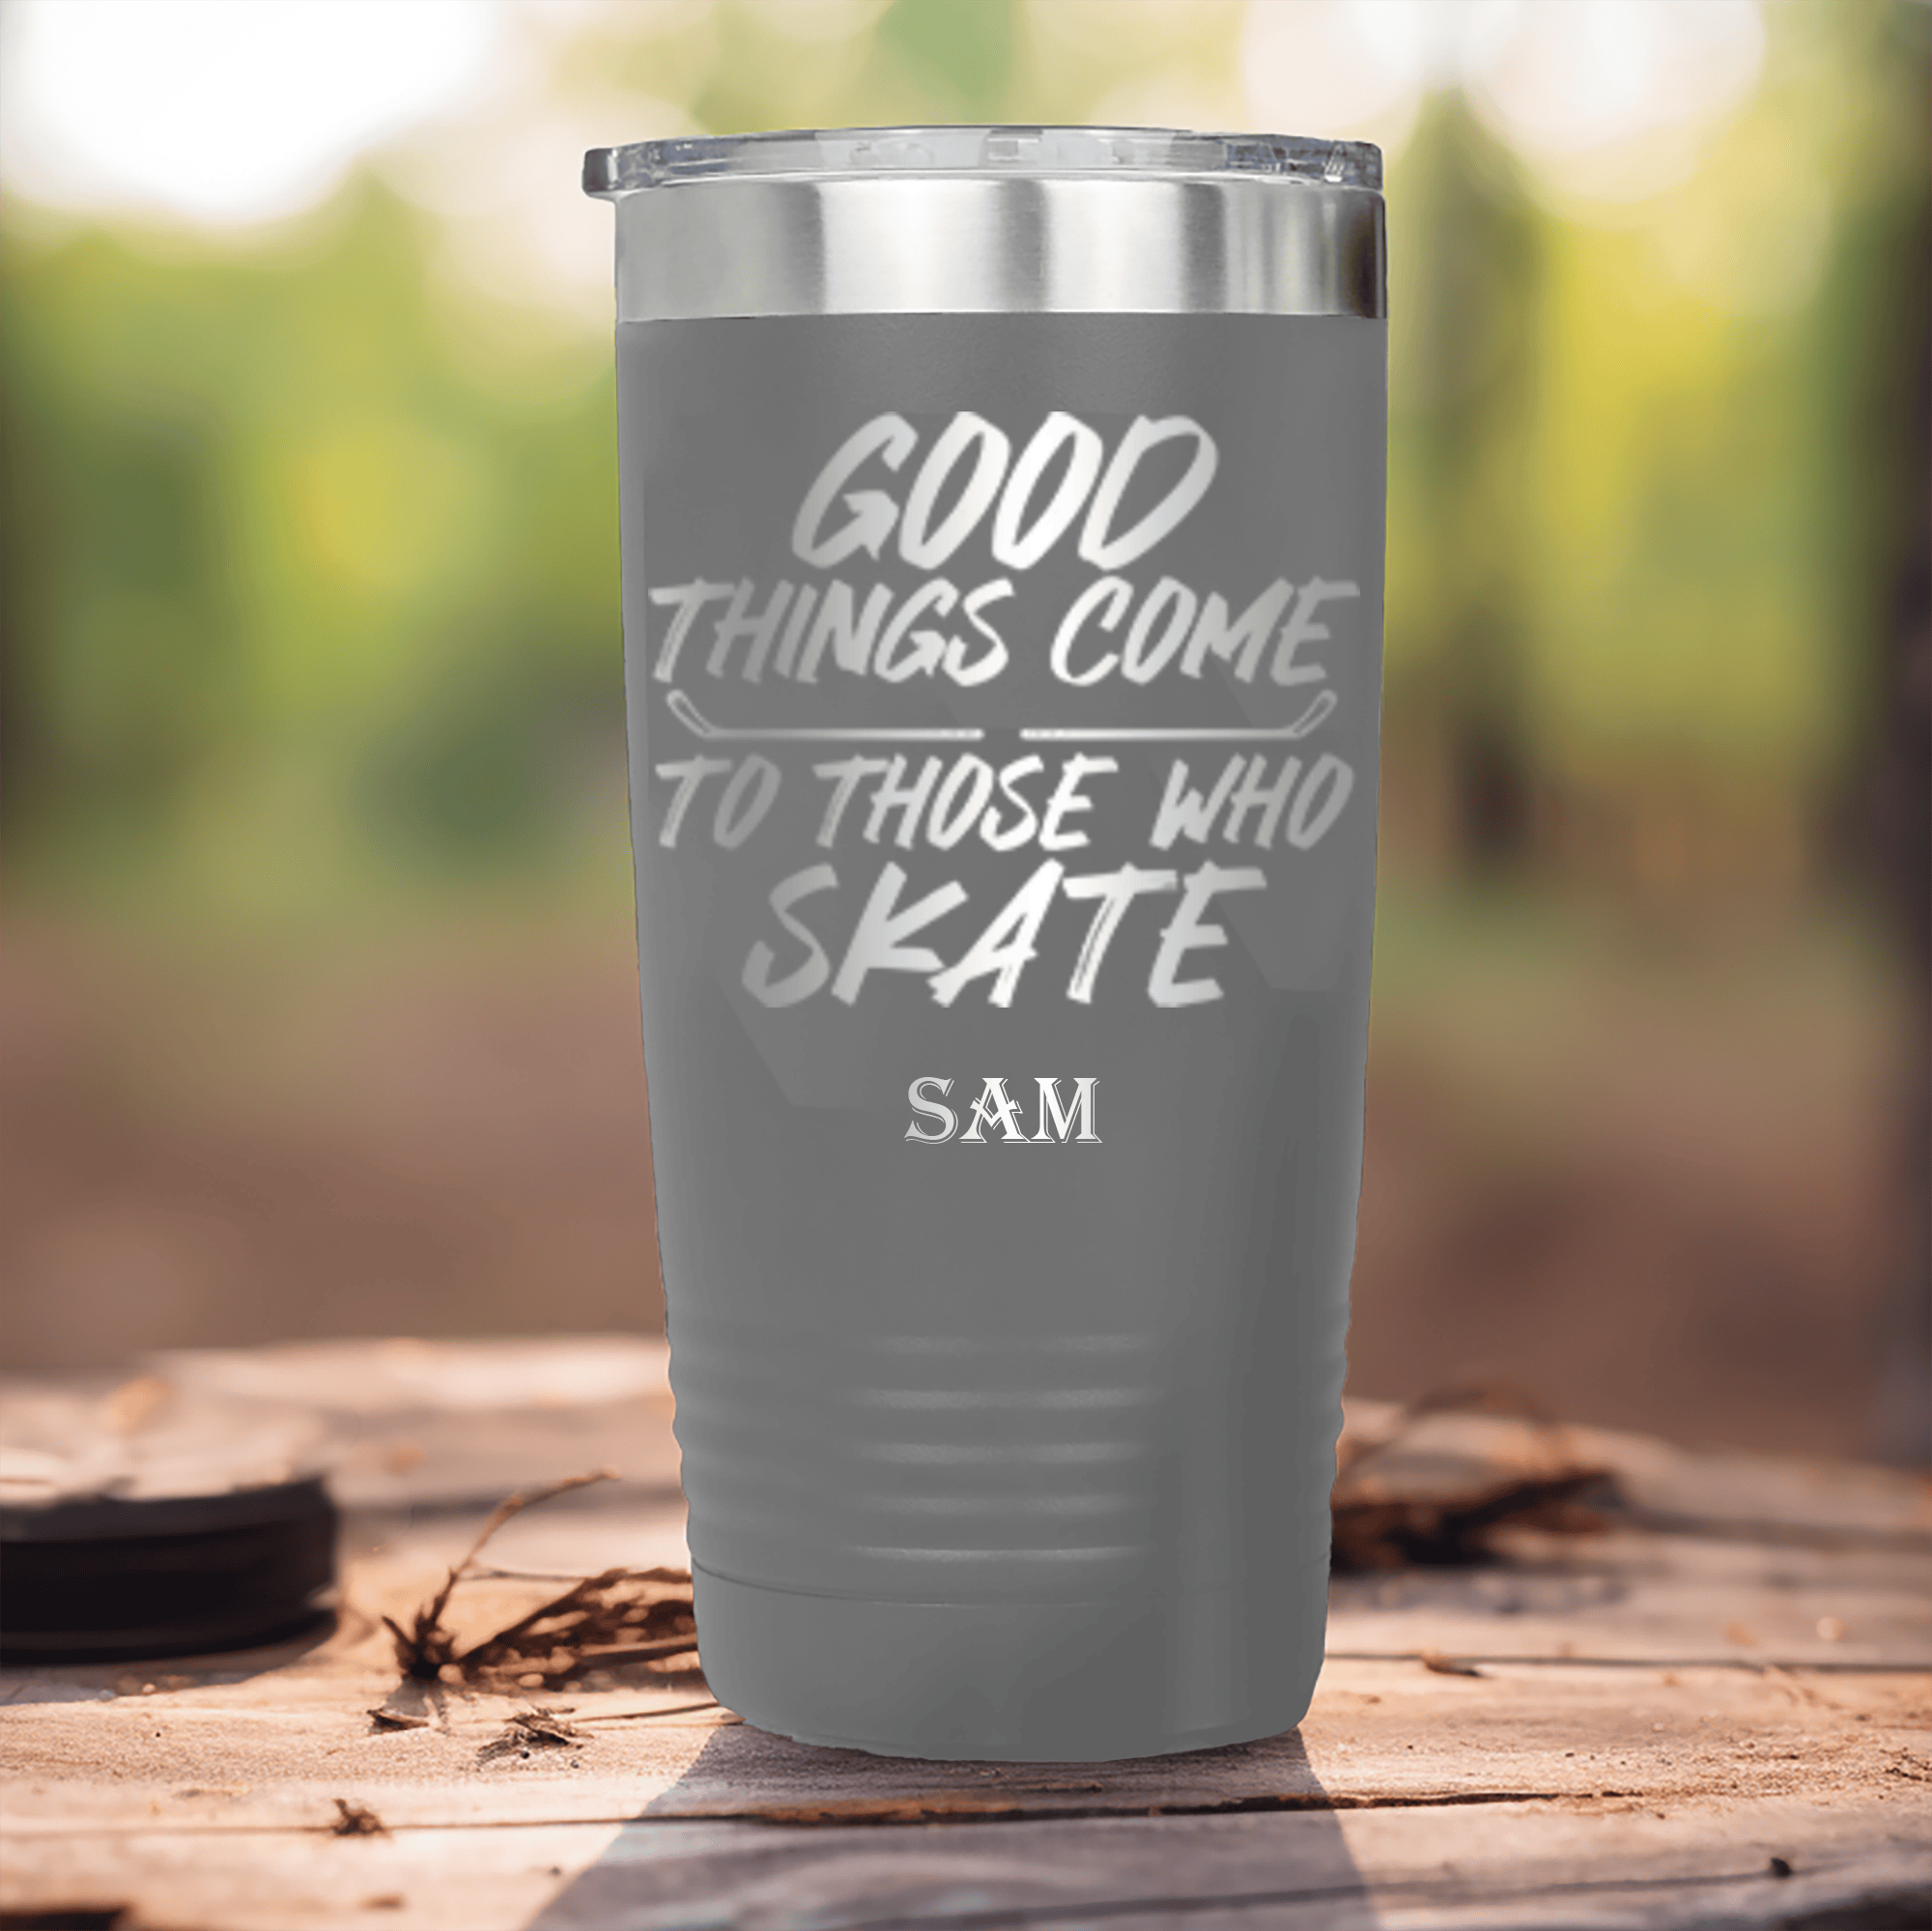 Grey Hockey Tumbler With Patience And Speed On Skates Design